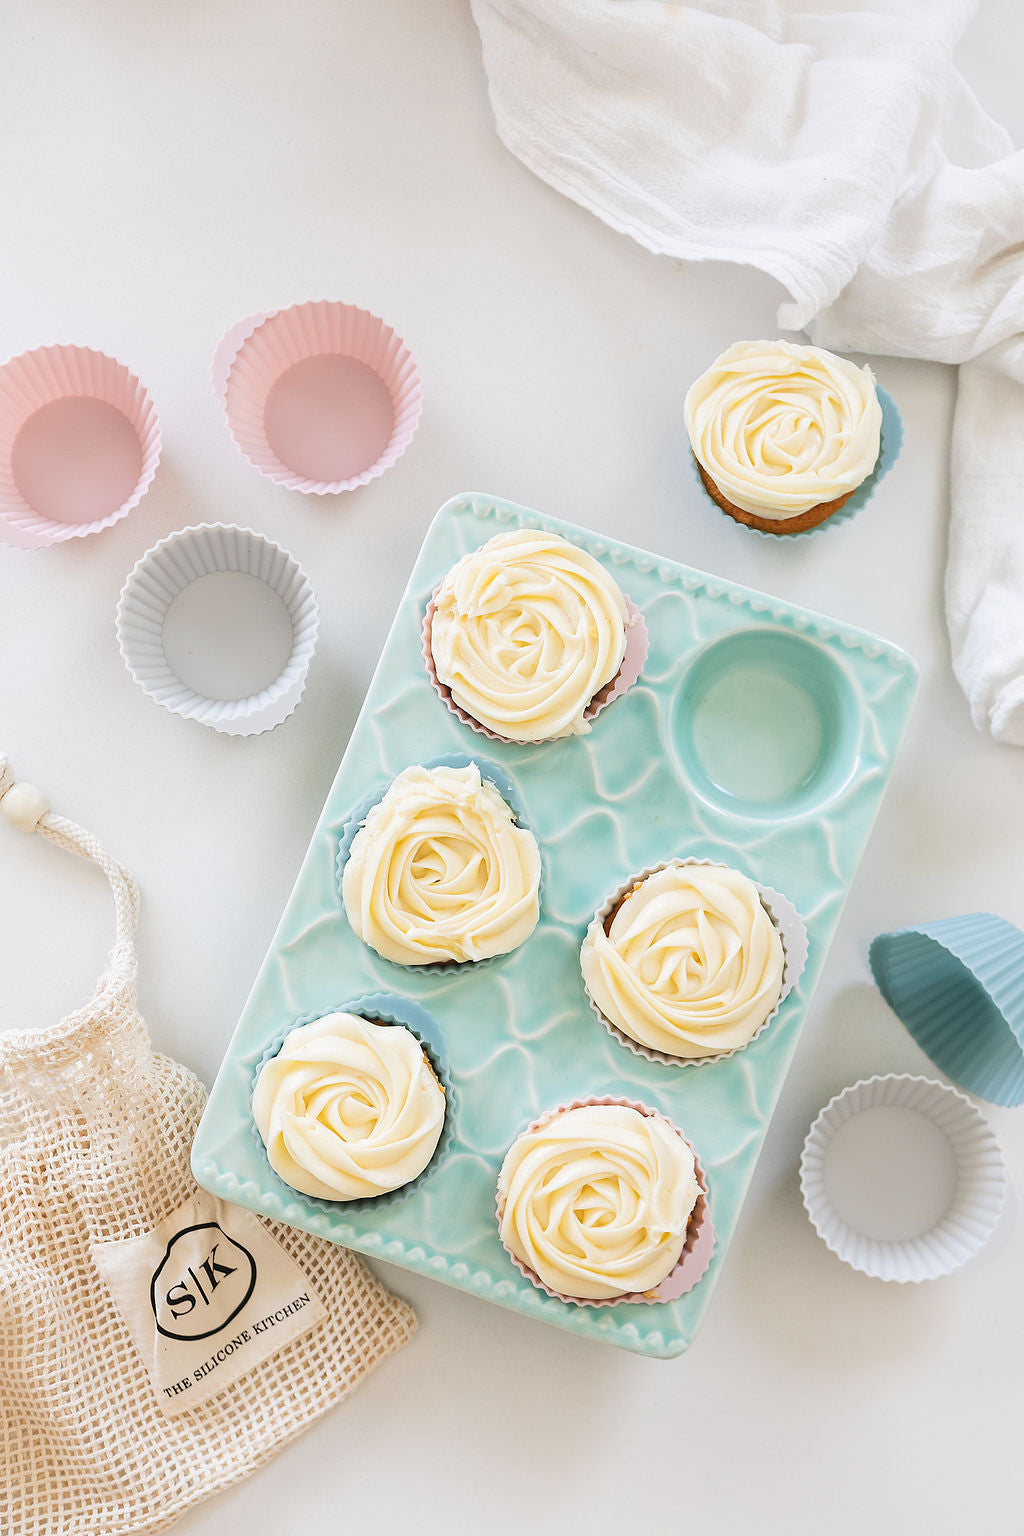 Gift Bundle | Silicone Baking Cups | Dusty Rose & Blue